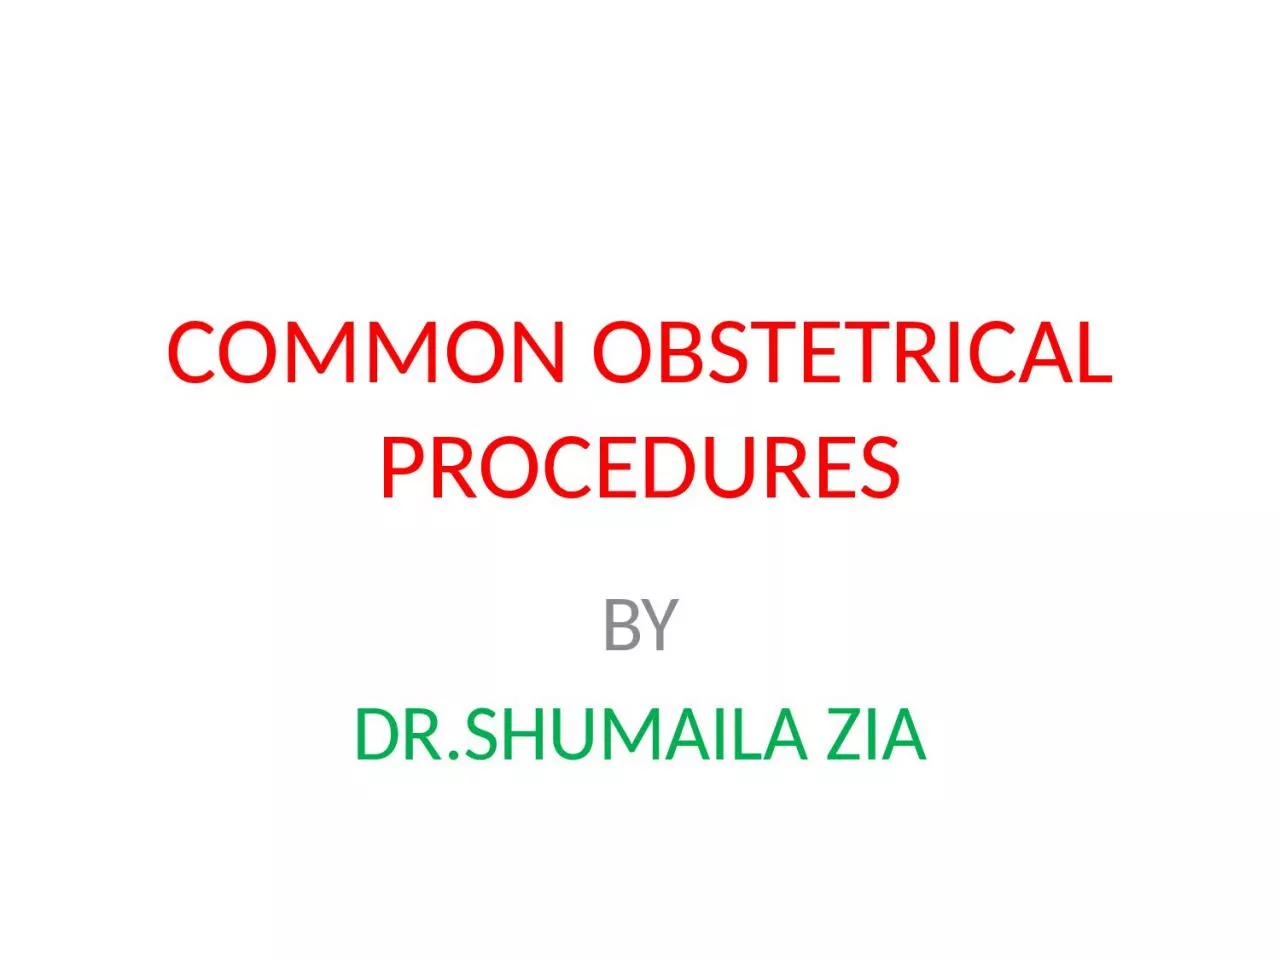 COMMON OBSTETRICAL PROCEDURES